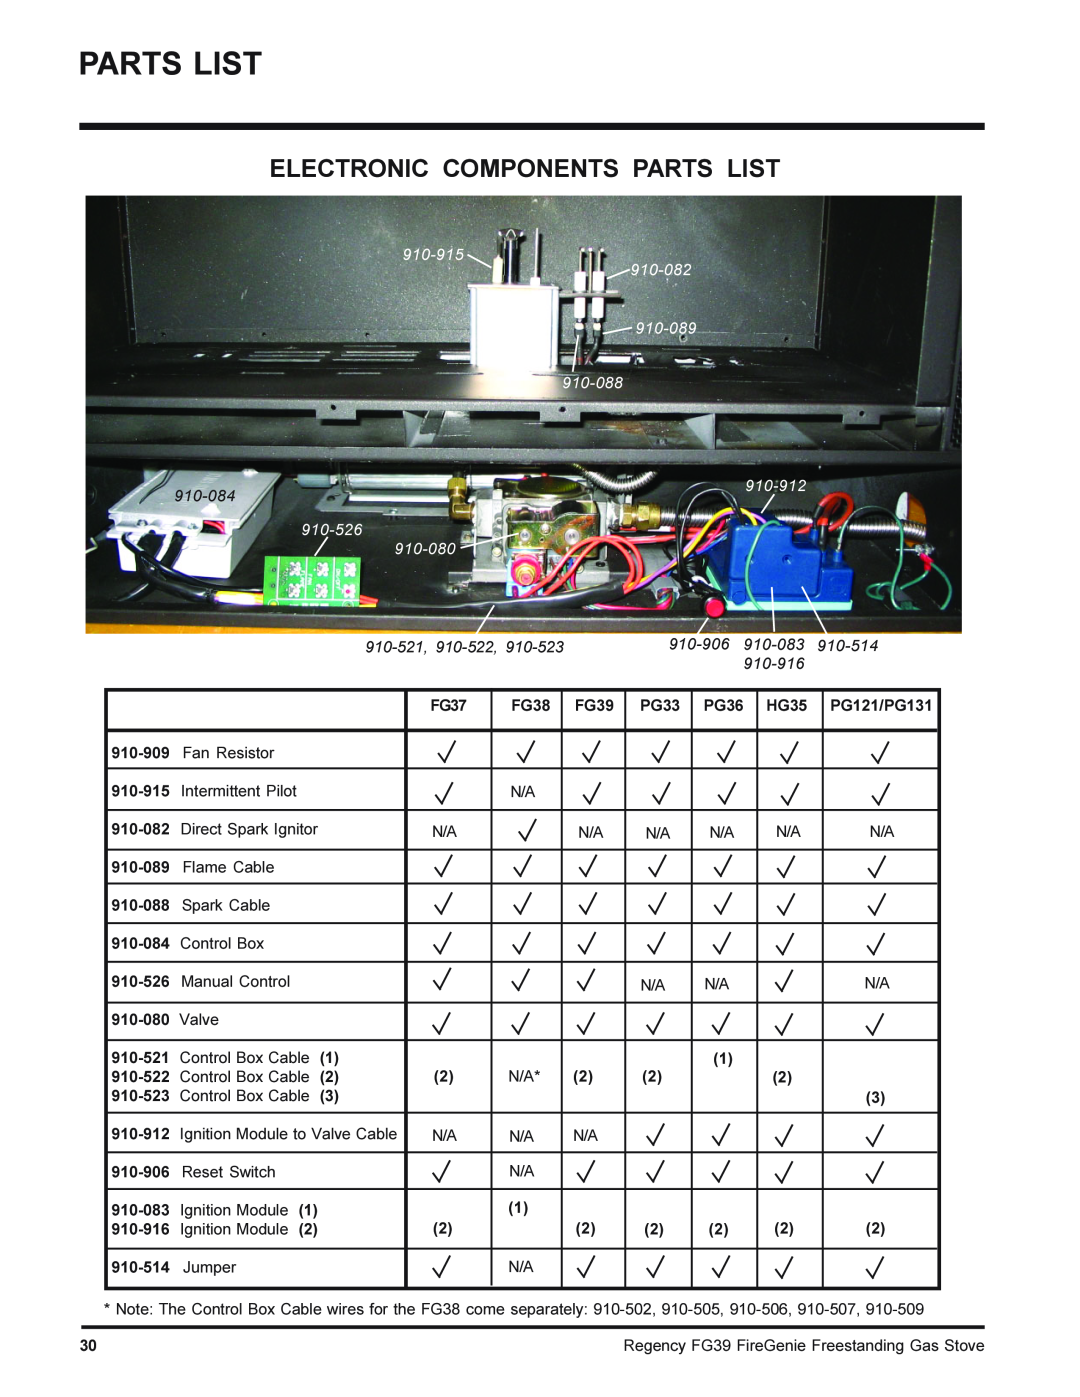 Regency FG39-LPG, FG39-NG installation manual Electronic Components Parts List, 910-915, 910-084, 910-912, 910-526, 910-080 